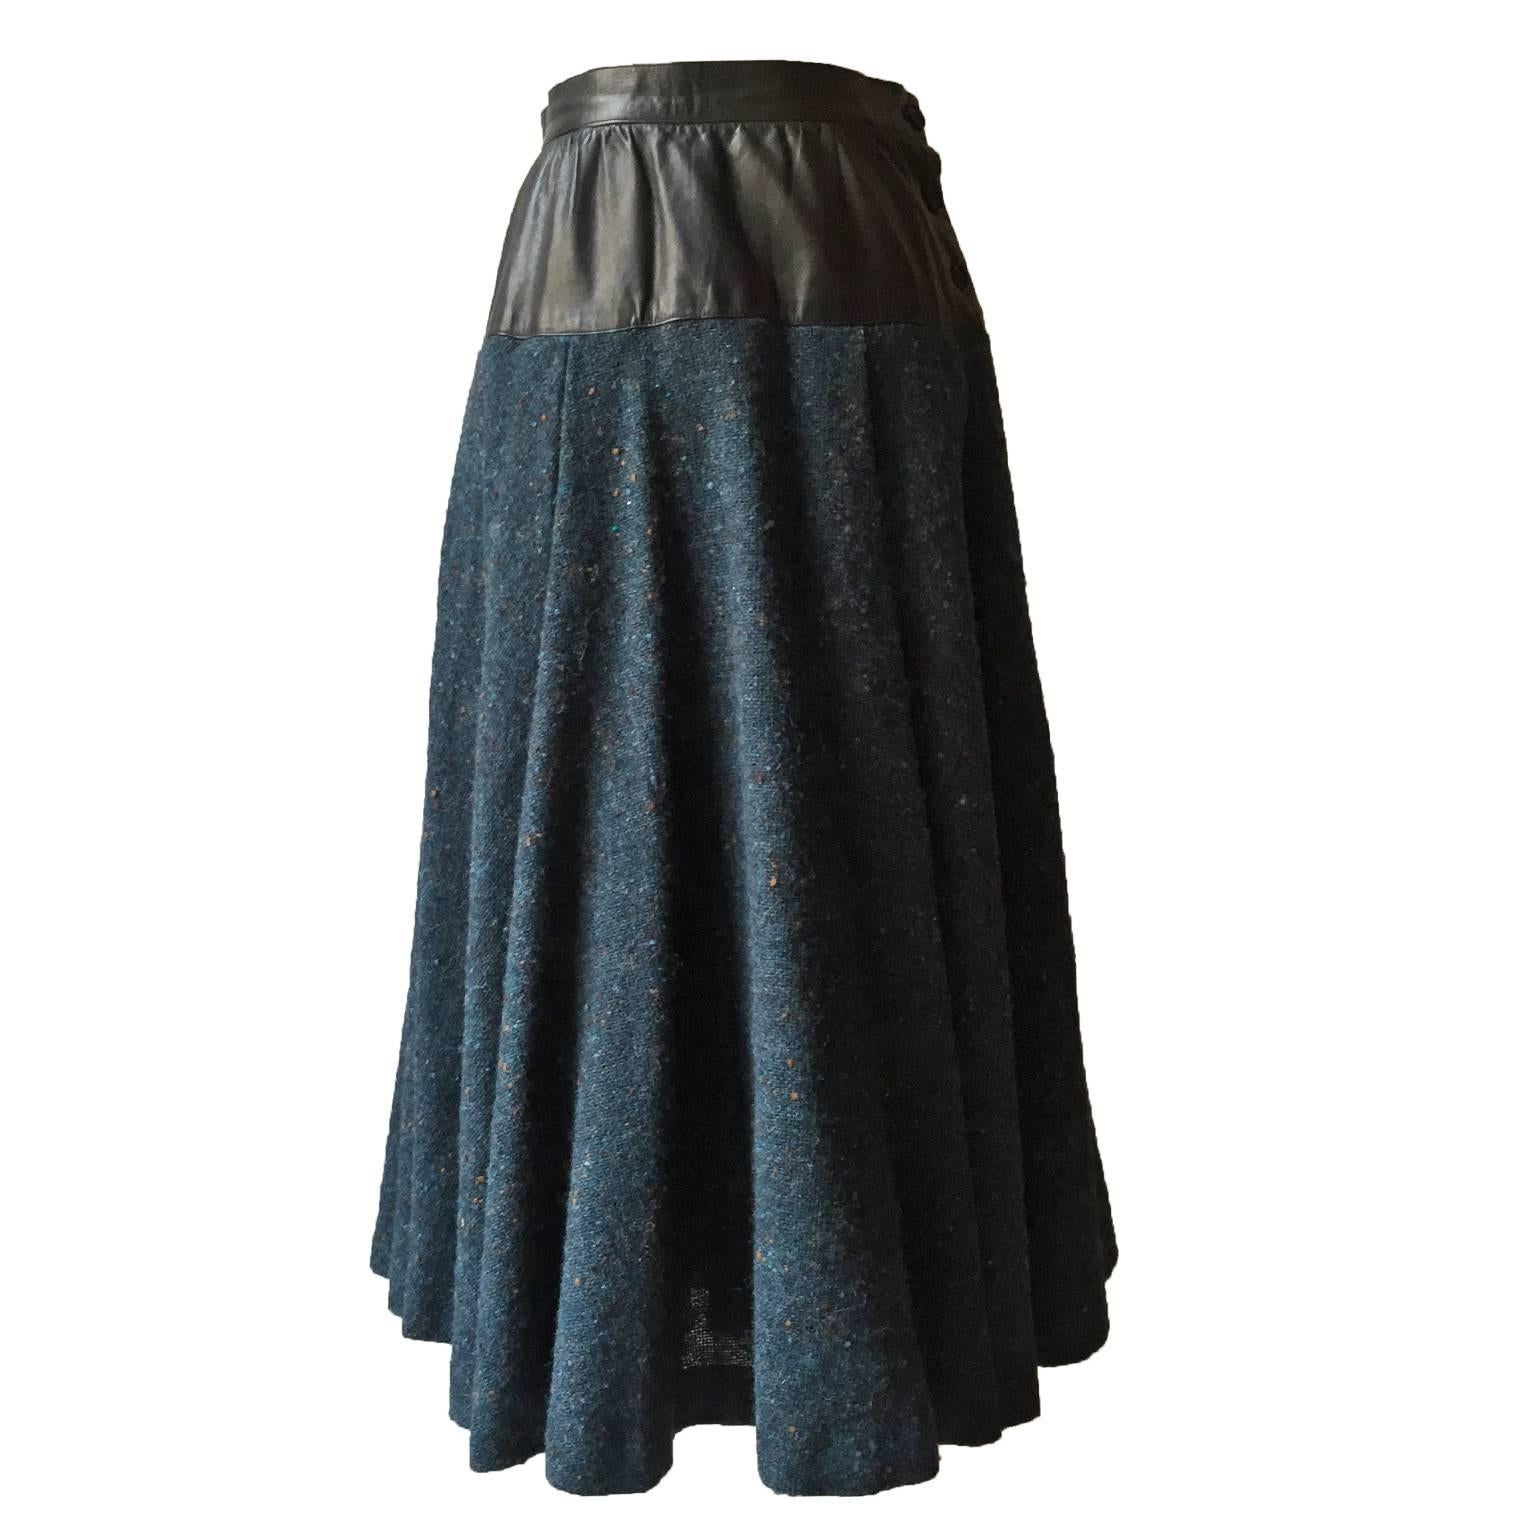 Yves Saint Laurent two toned skirt from 1980s. Dark blue base heavy tweed with leather waist detail, side button closure. 
Measurements :
Waist : 63 cm
Total length 72 cm